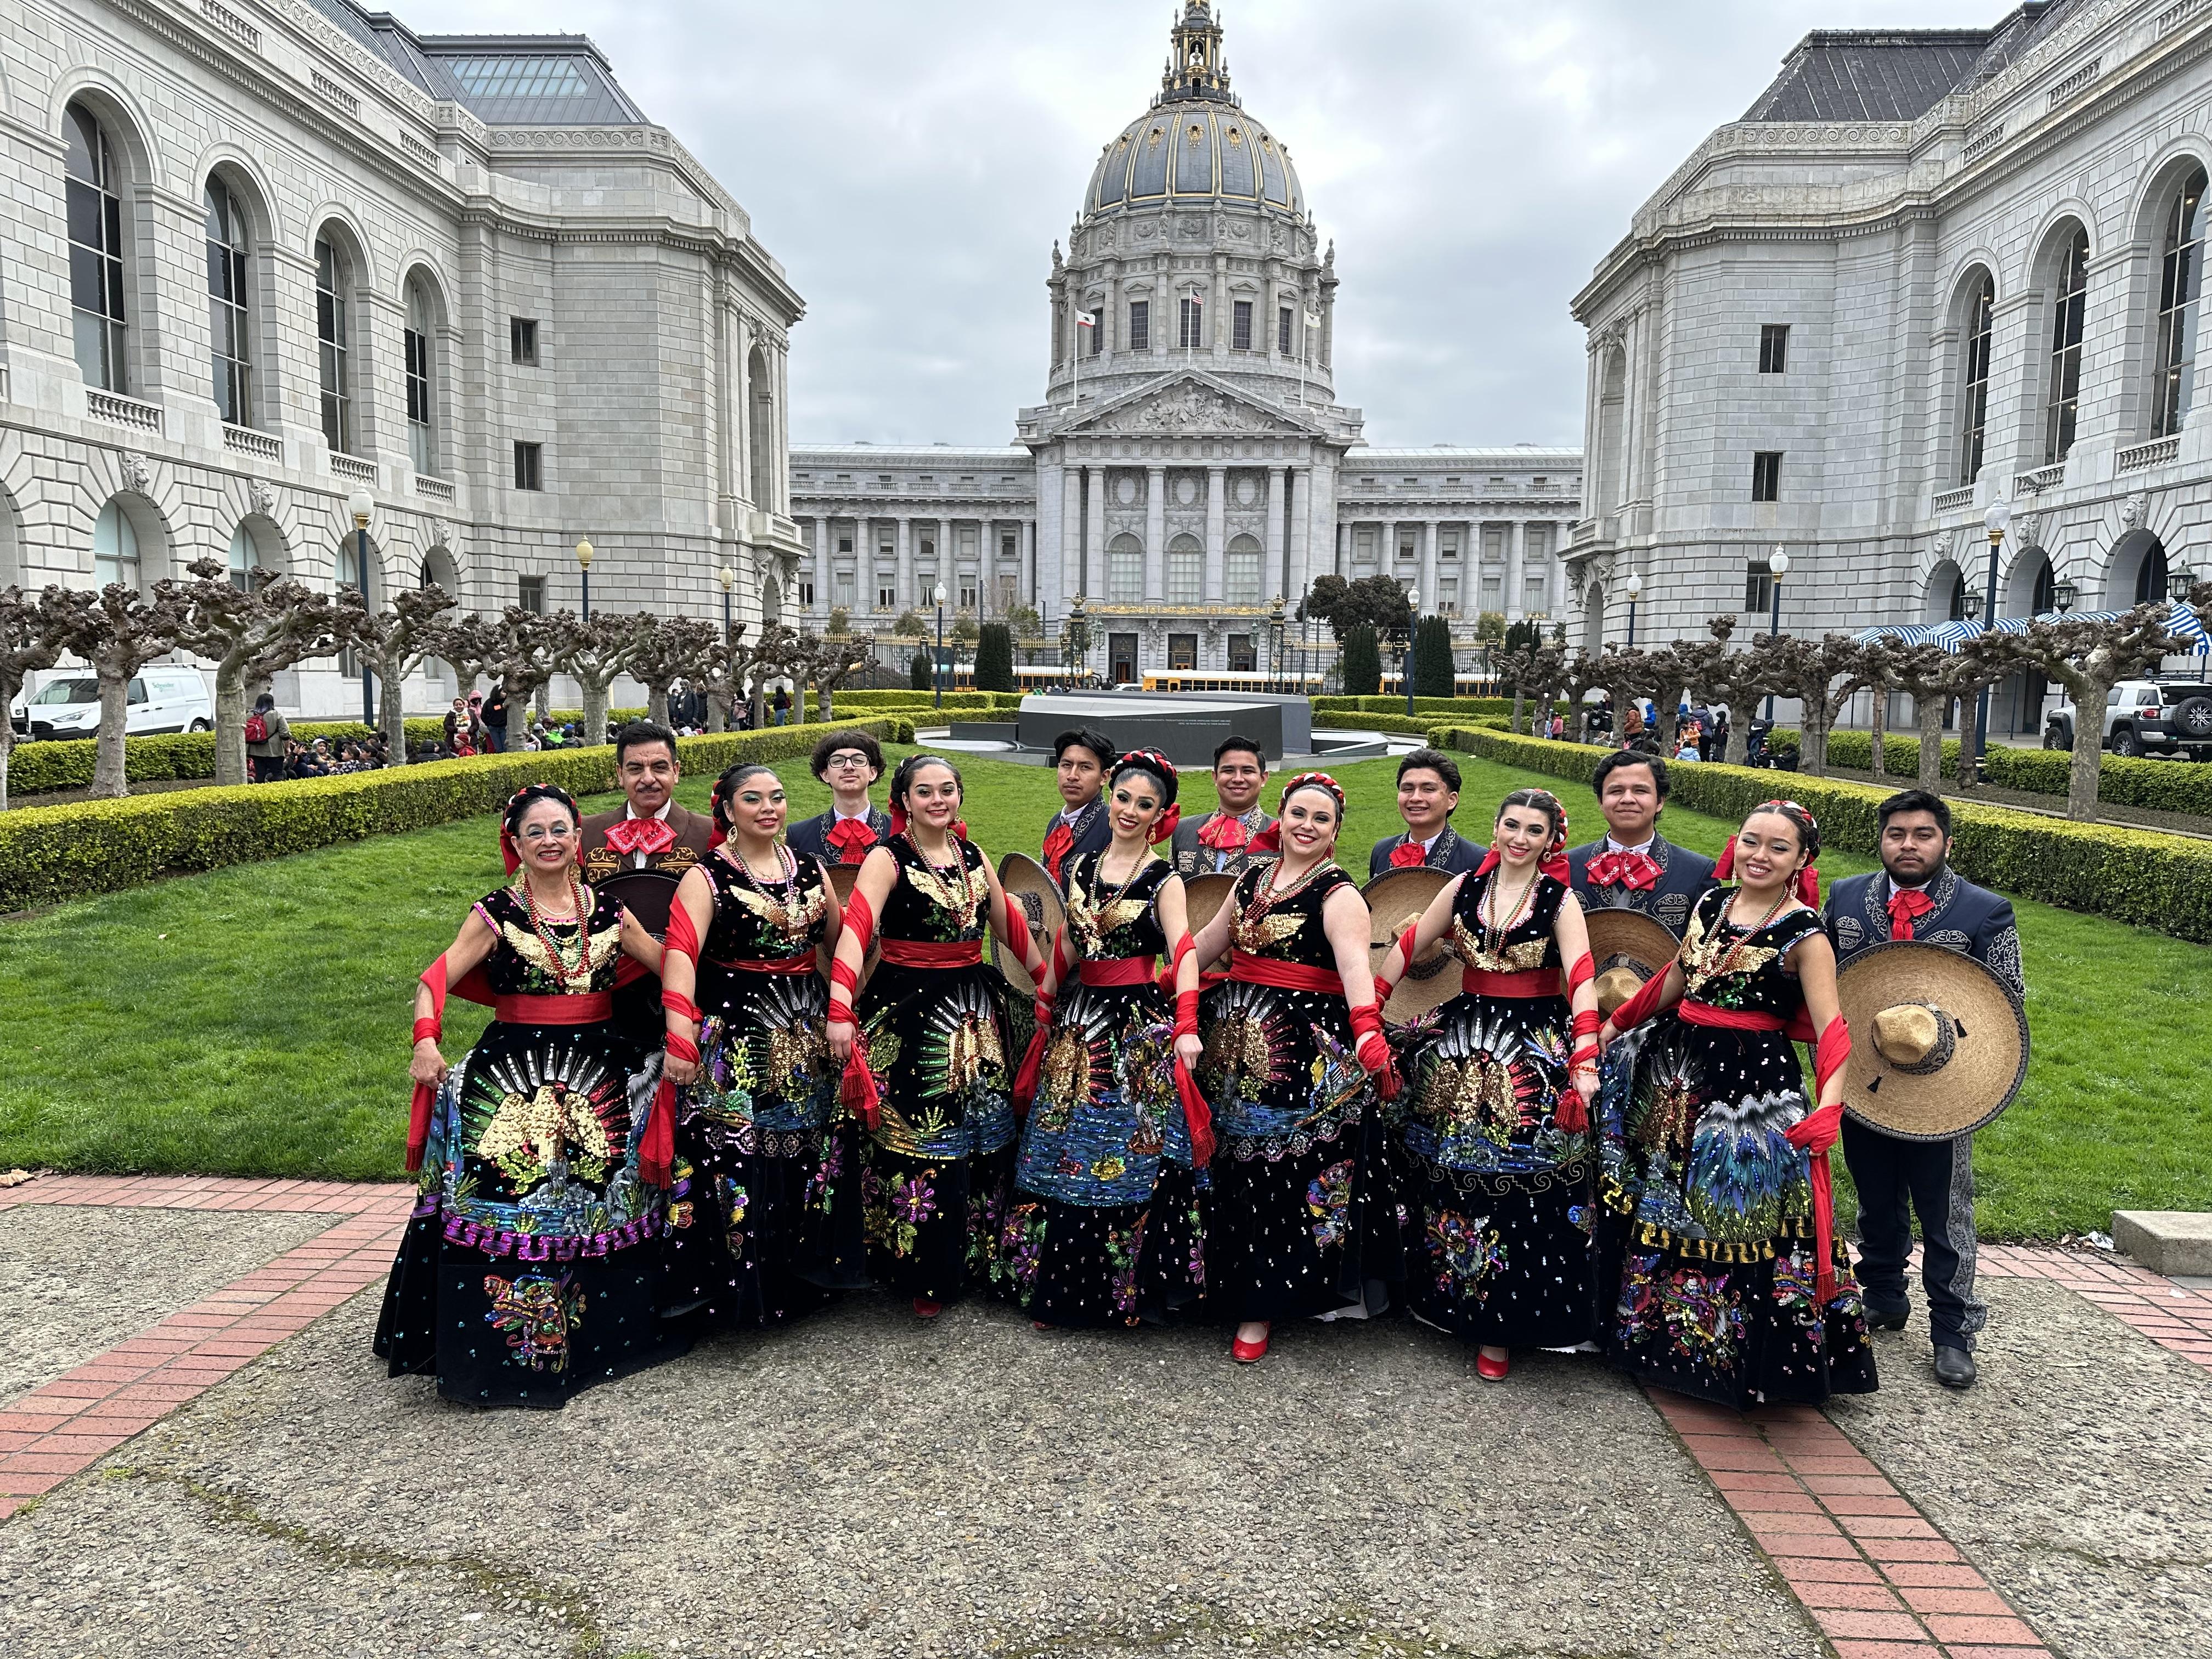 Students of South San Francisco High School's Ballet Folklórico Alma de México program pose in front of San Francisco City Hall on March 20, 2023, before performing at the War Memorial Opera House as part of San Francisco Unified School District's annual Children's Day celebration.